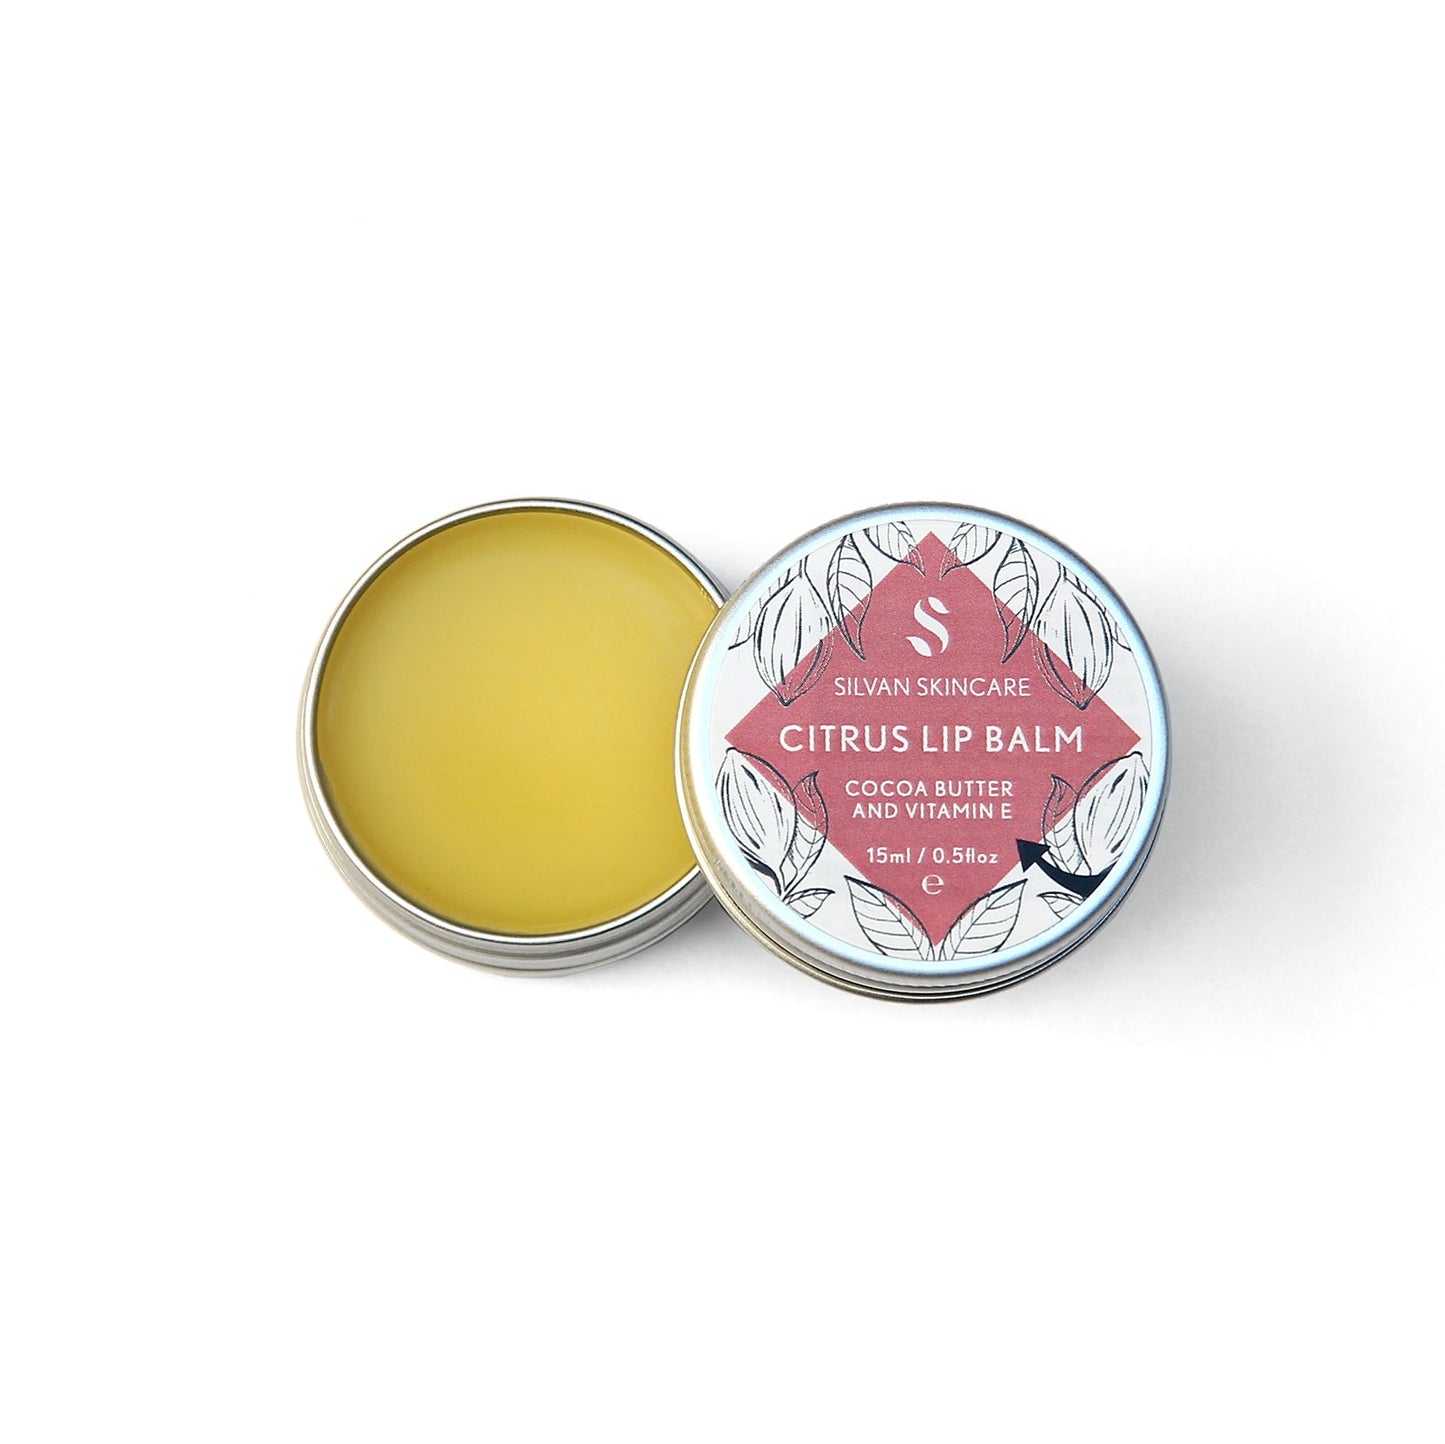 Single aluminium tin of the Silvan Skincare citrus lip balm. The pot in open, showing the yellow balm inside and the lid is beside it showing the white and pink label